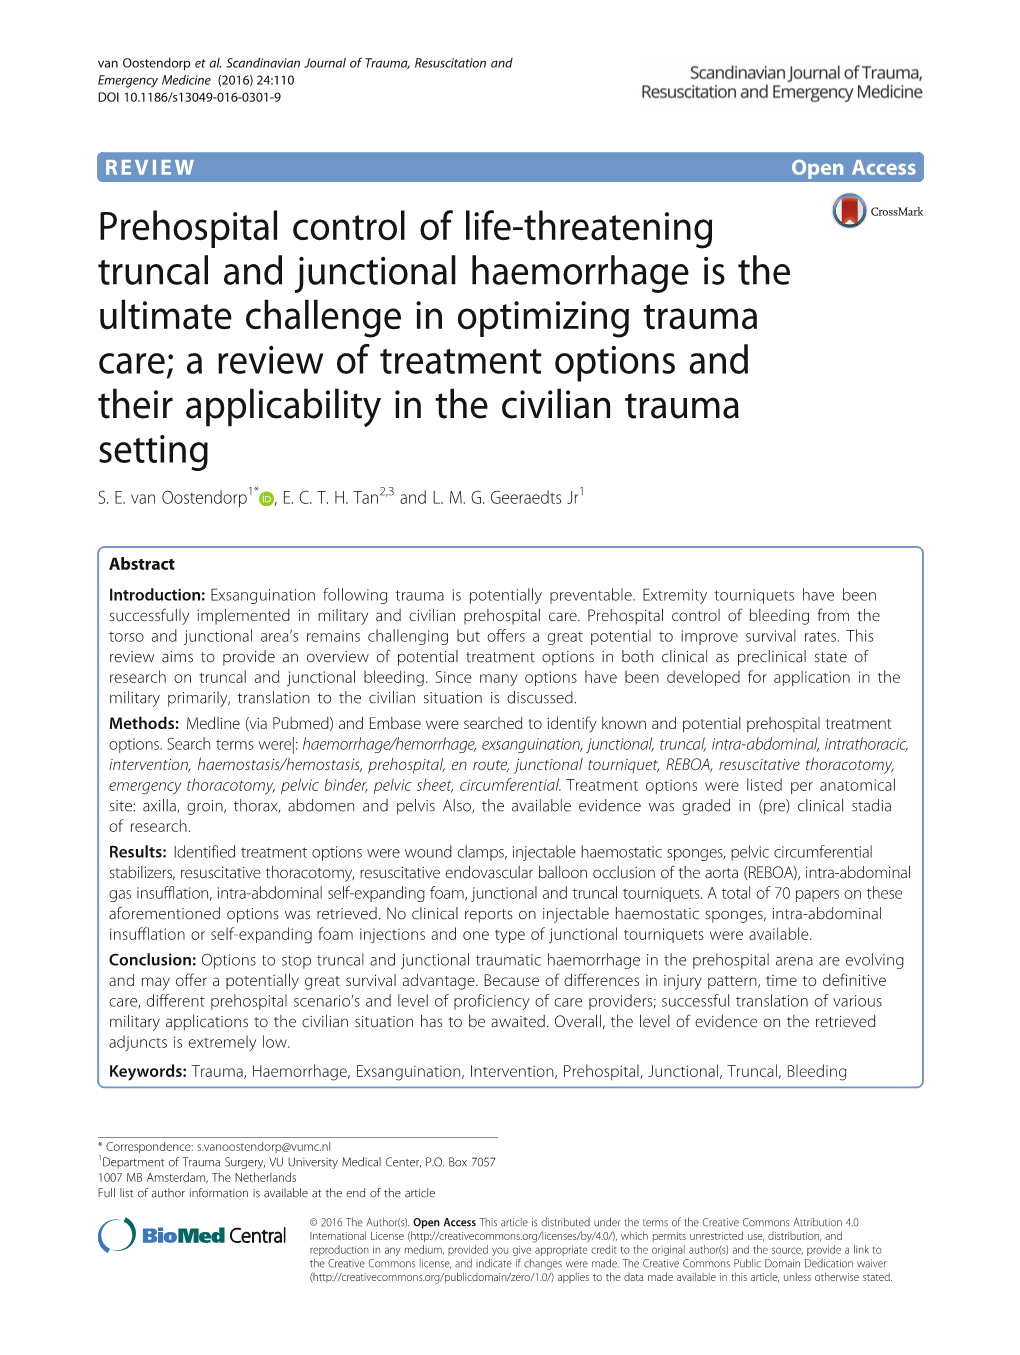 Prehospital Control of Life-Threatening Truncal and Junctional Haemorrhage